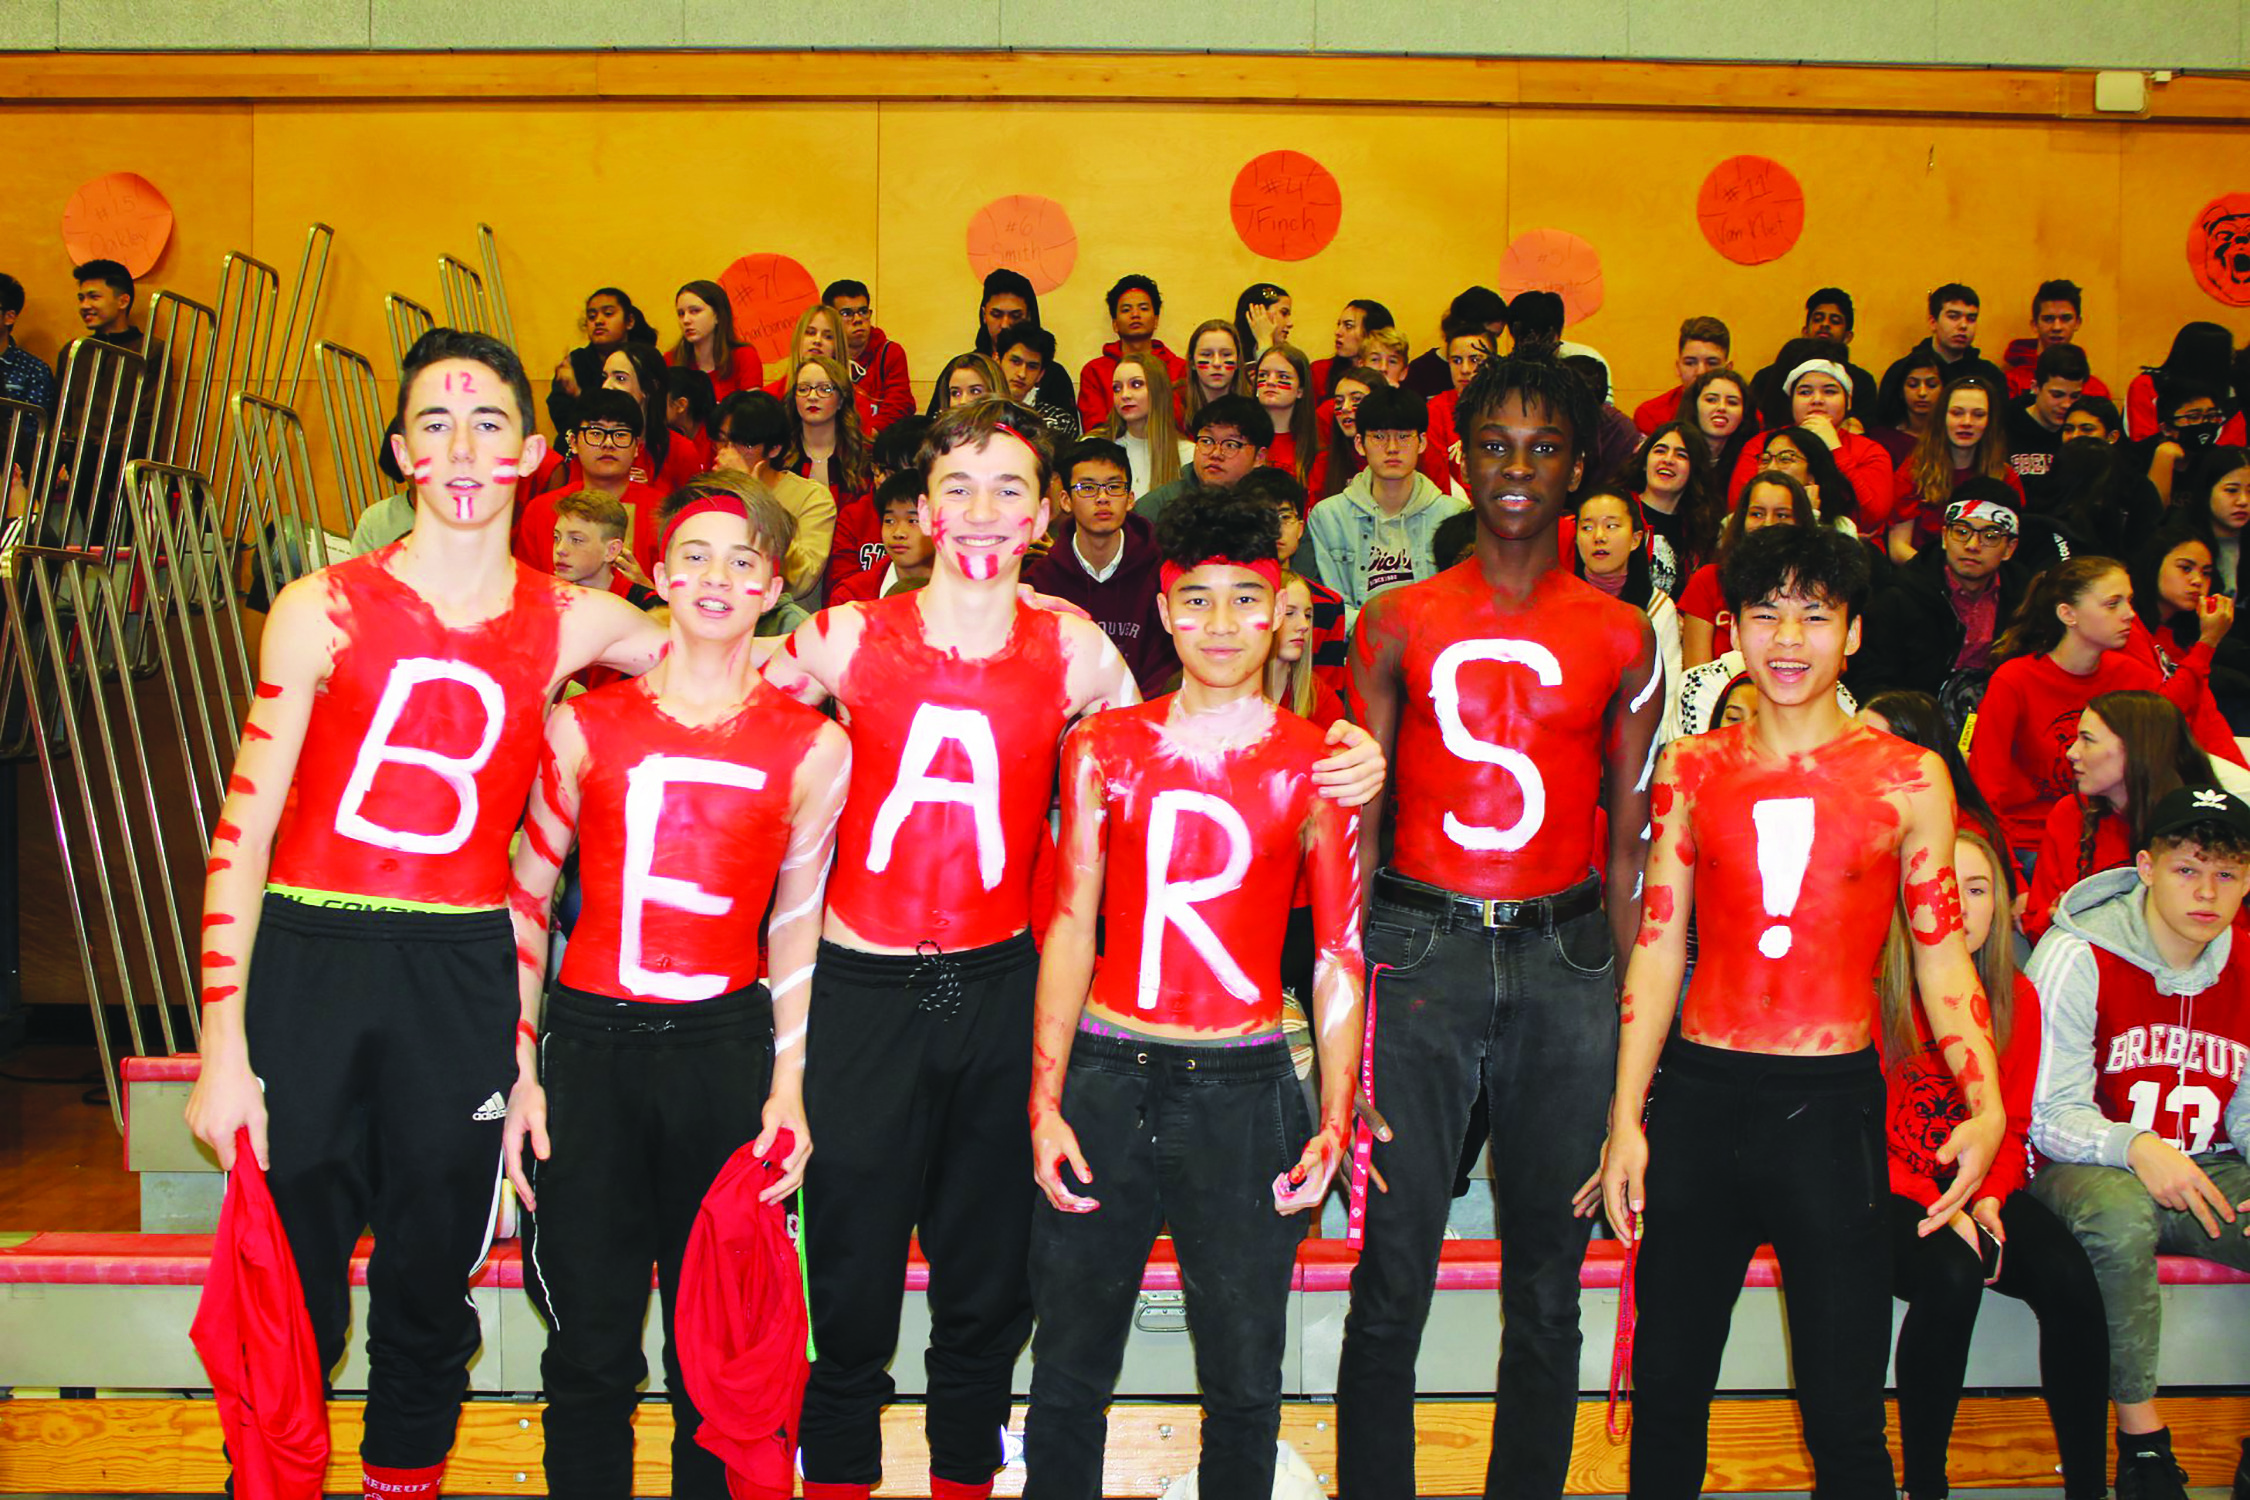 Students stand in front of filled bleachers with "B-E-A-R-S-!" painted on their chests.